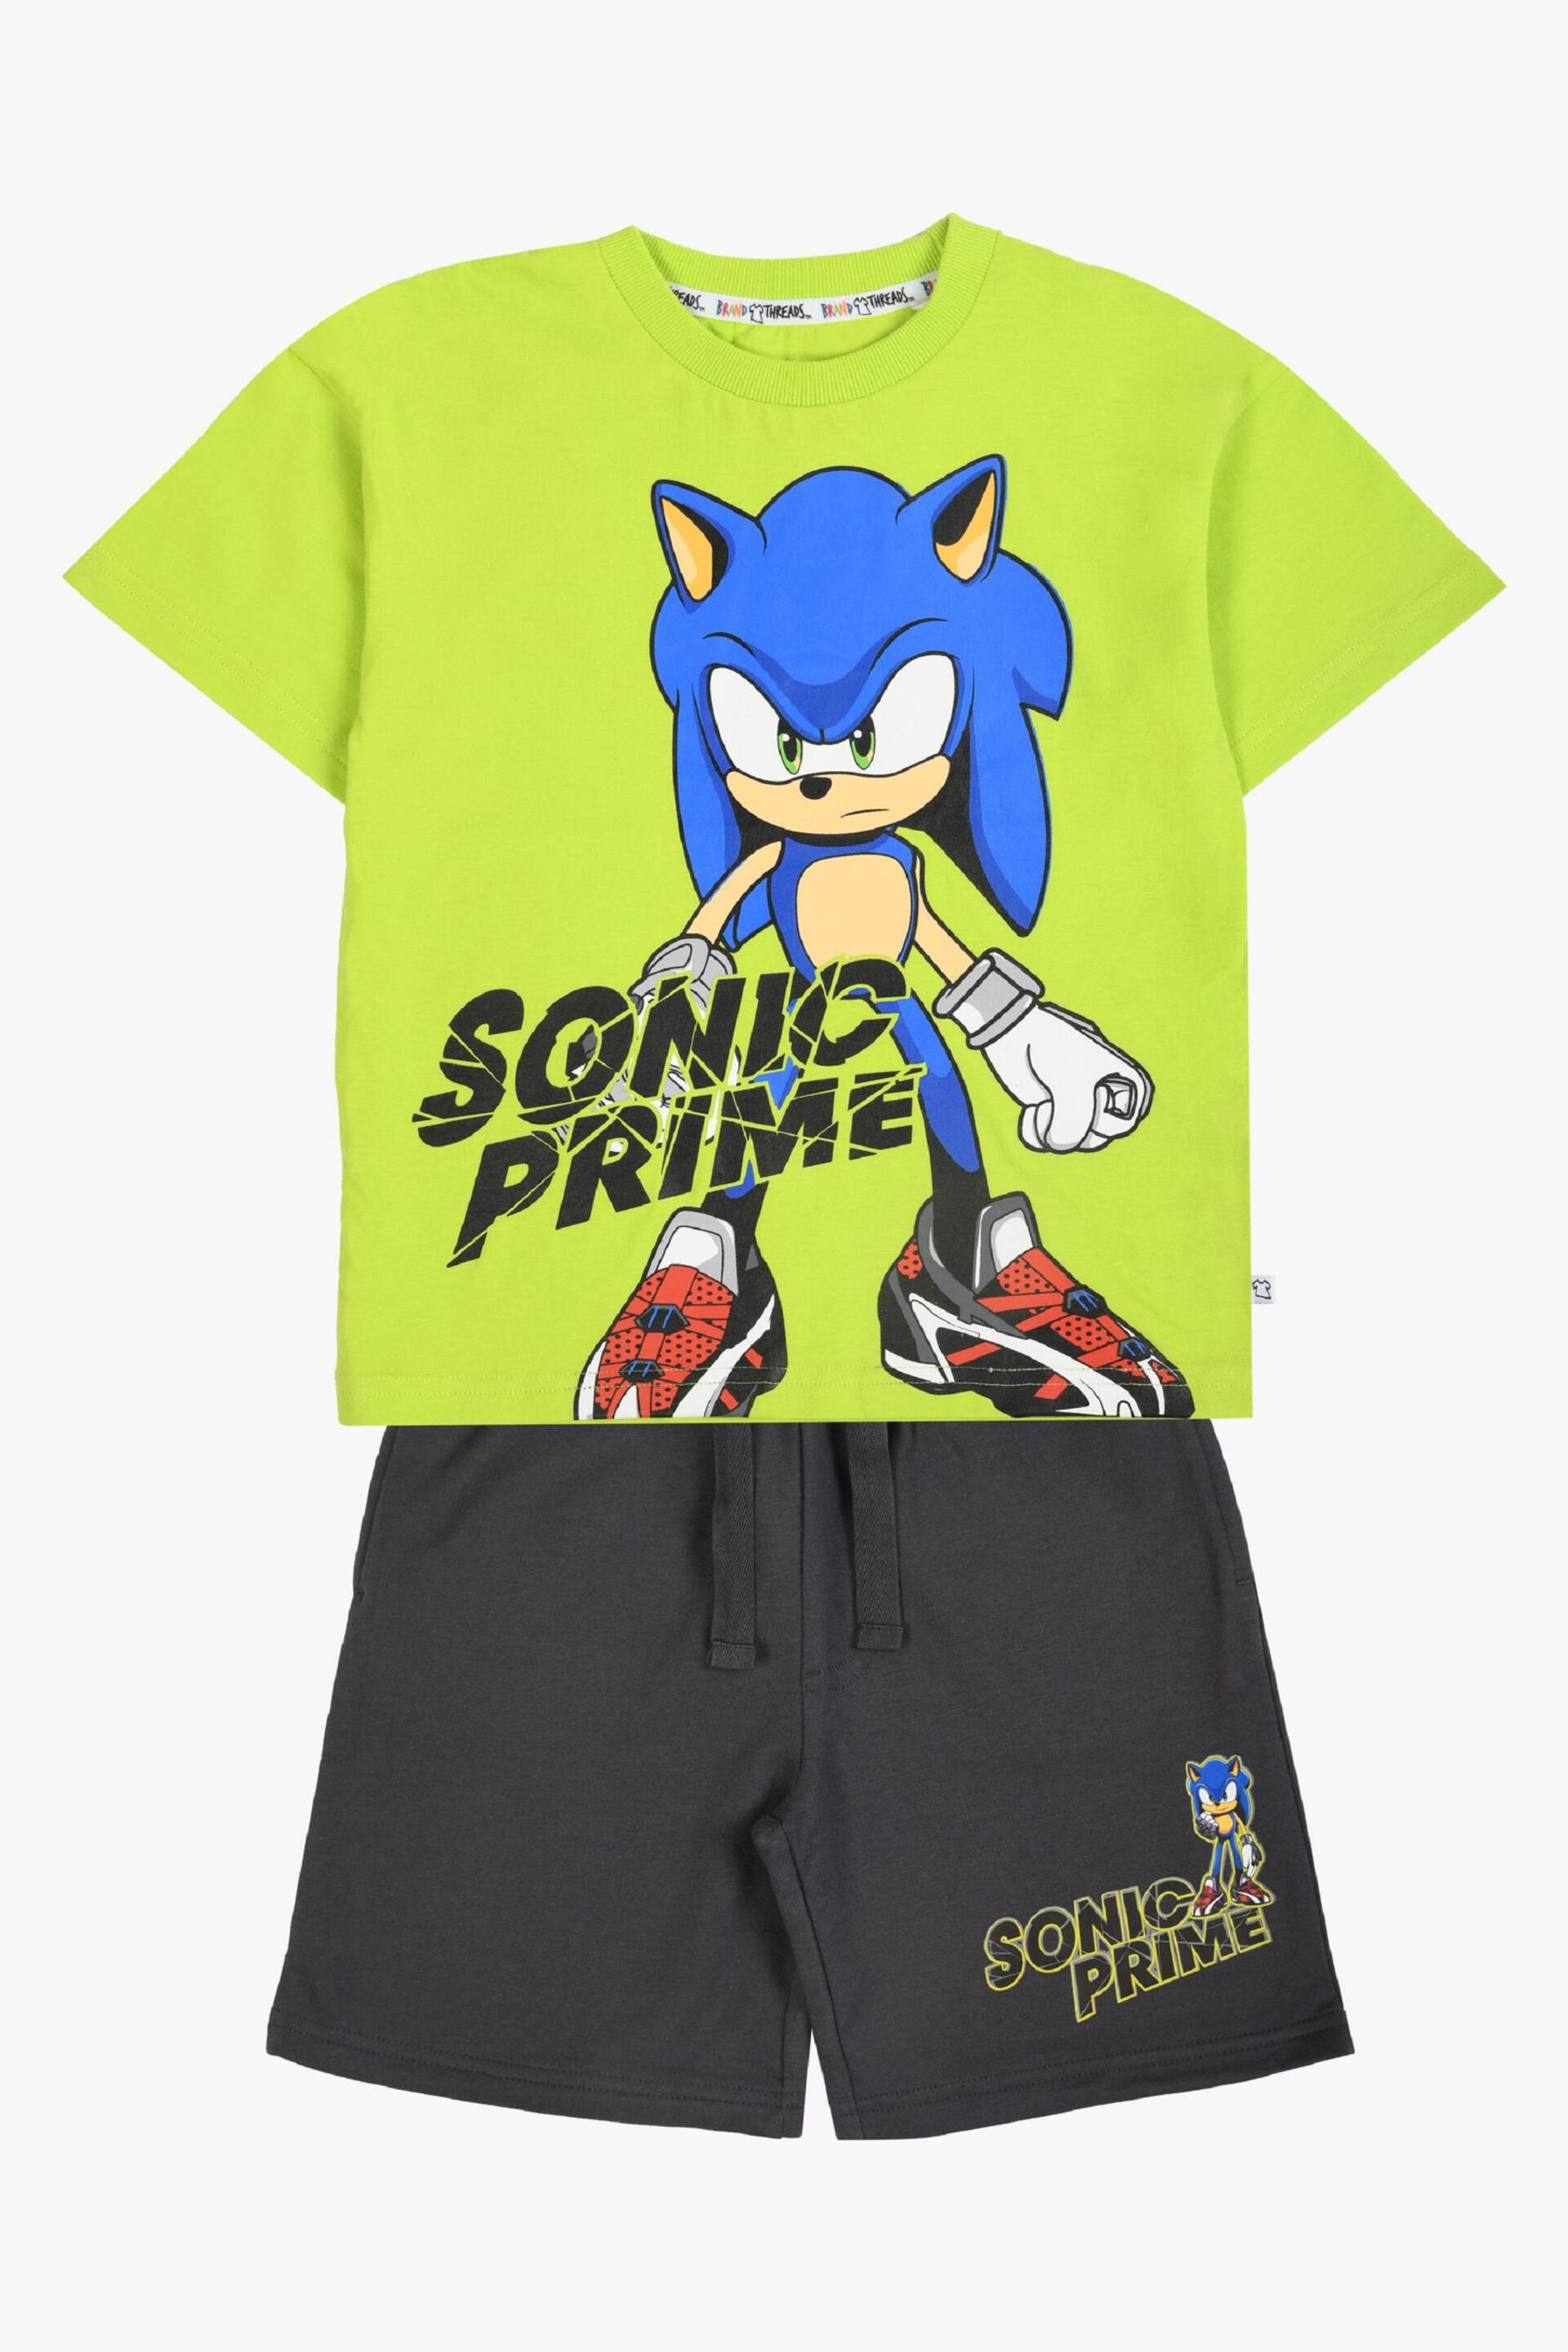 Brand Threads Green Sonic Prime Boys T-Shirt and Shorts Set Green - Image 1 of 5